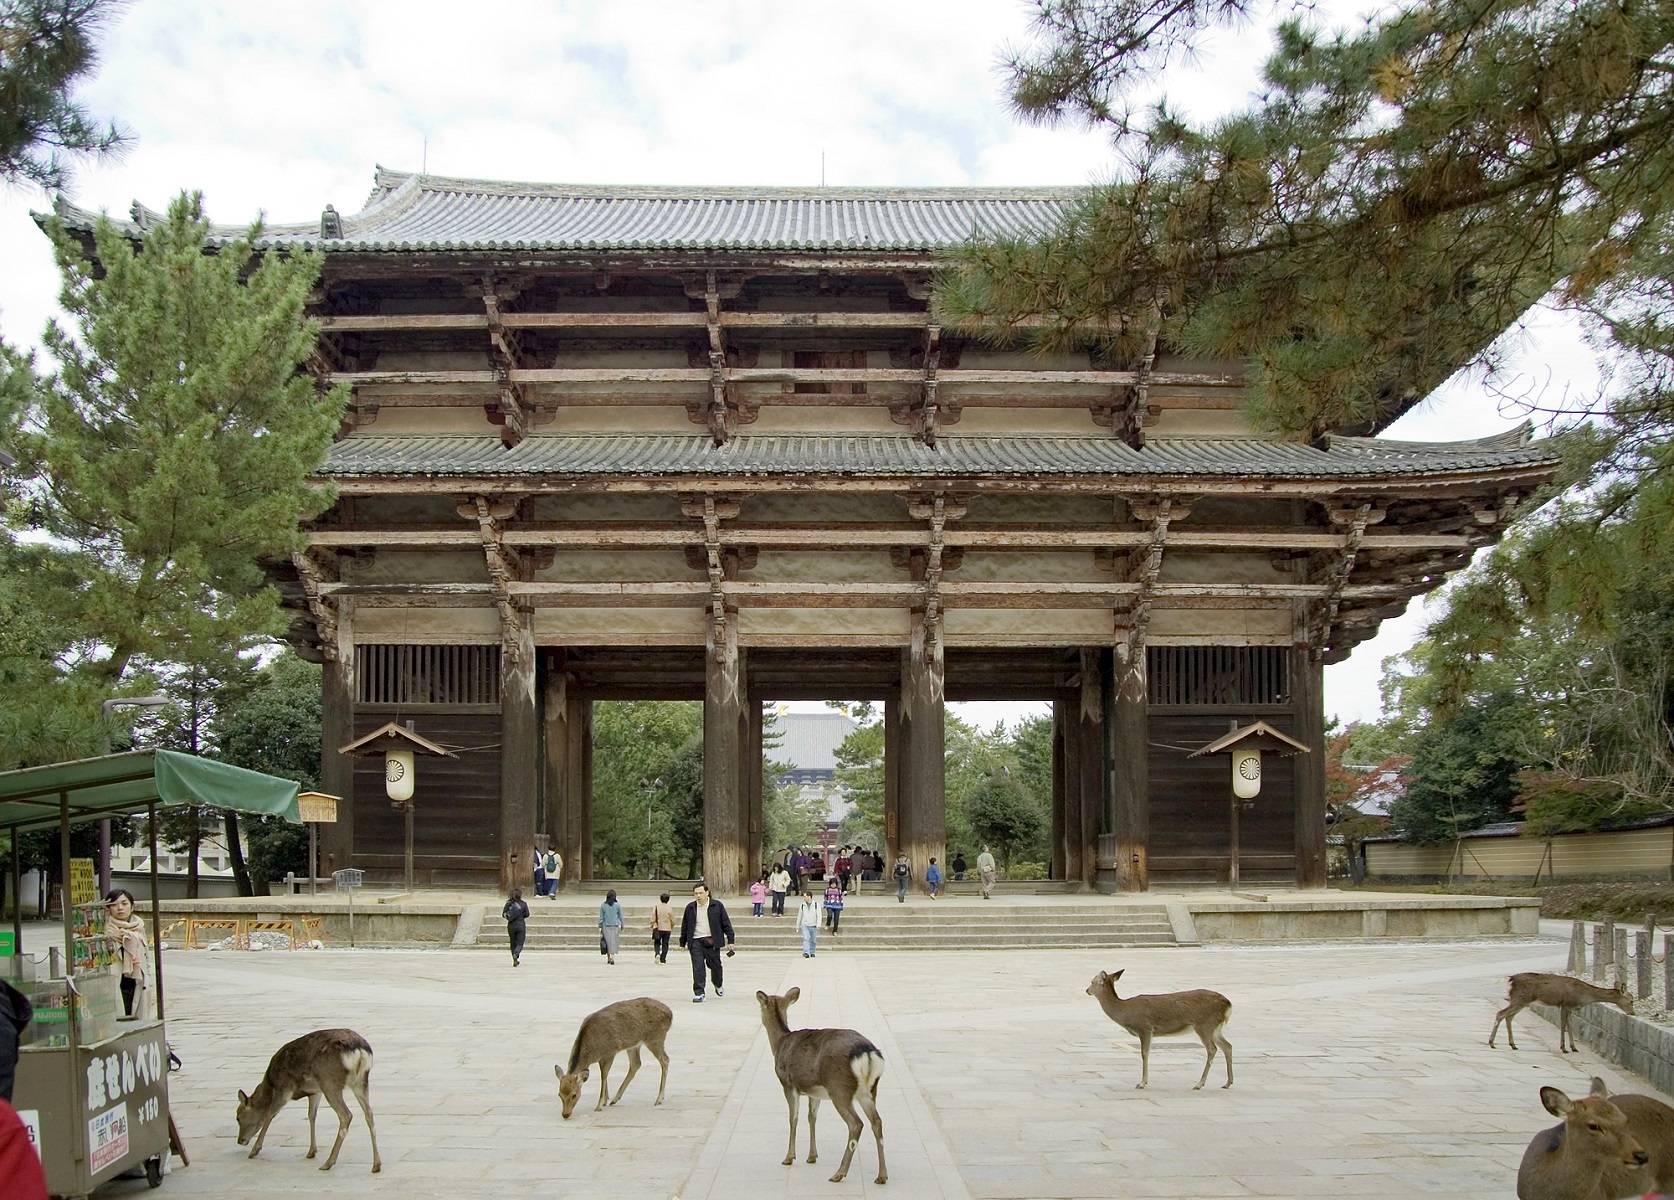 <p>A renowned spiritual site in Japan, Tōdai-ji (or the Eastern Great Temple) is a must-see in the city of Nara. One highlight is the temple’s Daibutsuden (or Great Buddha Hall), where visitors can view the world’s largest statue of <a href="https://www.atlasobscura.com/places/t-daiji-daibutsuden-great-buddha-hall">the Buddha Vairocana</a> and other ancient treasures. </p><p>Keep an eye out for the tame Sika deer who wander freely around the complex. </p>